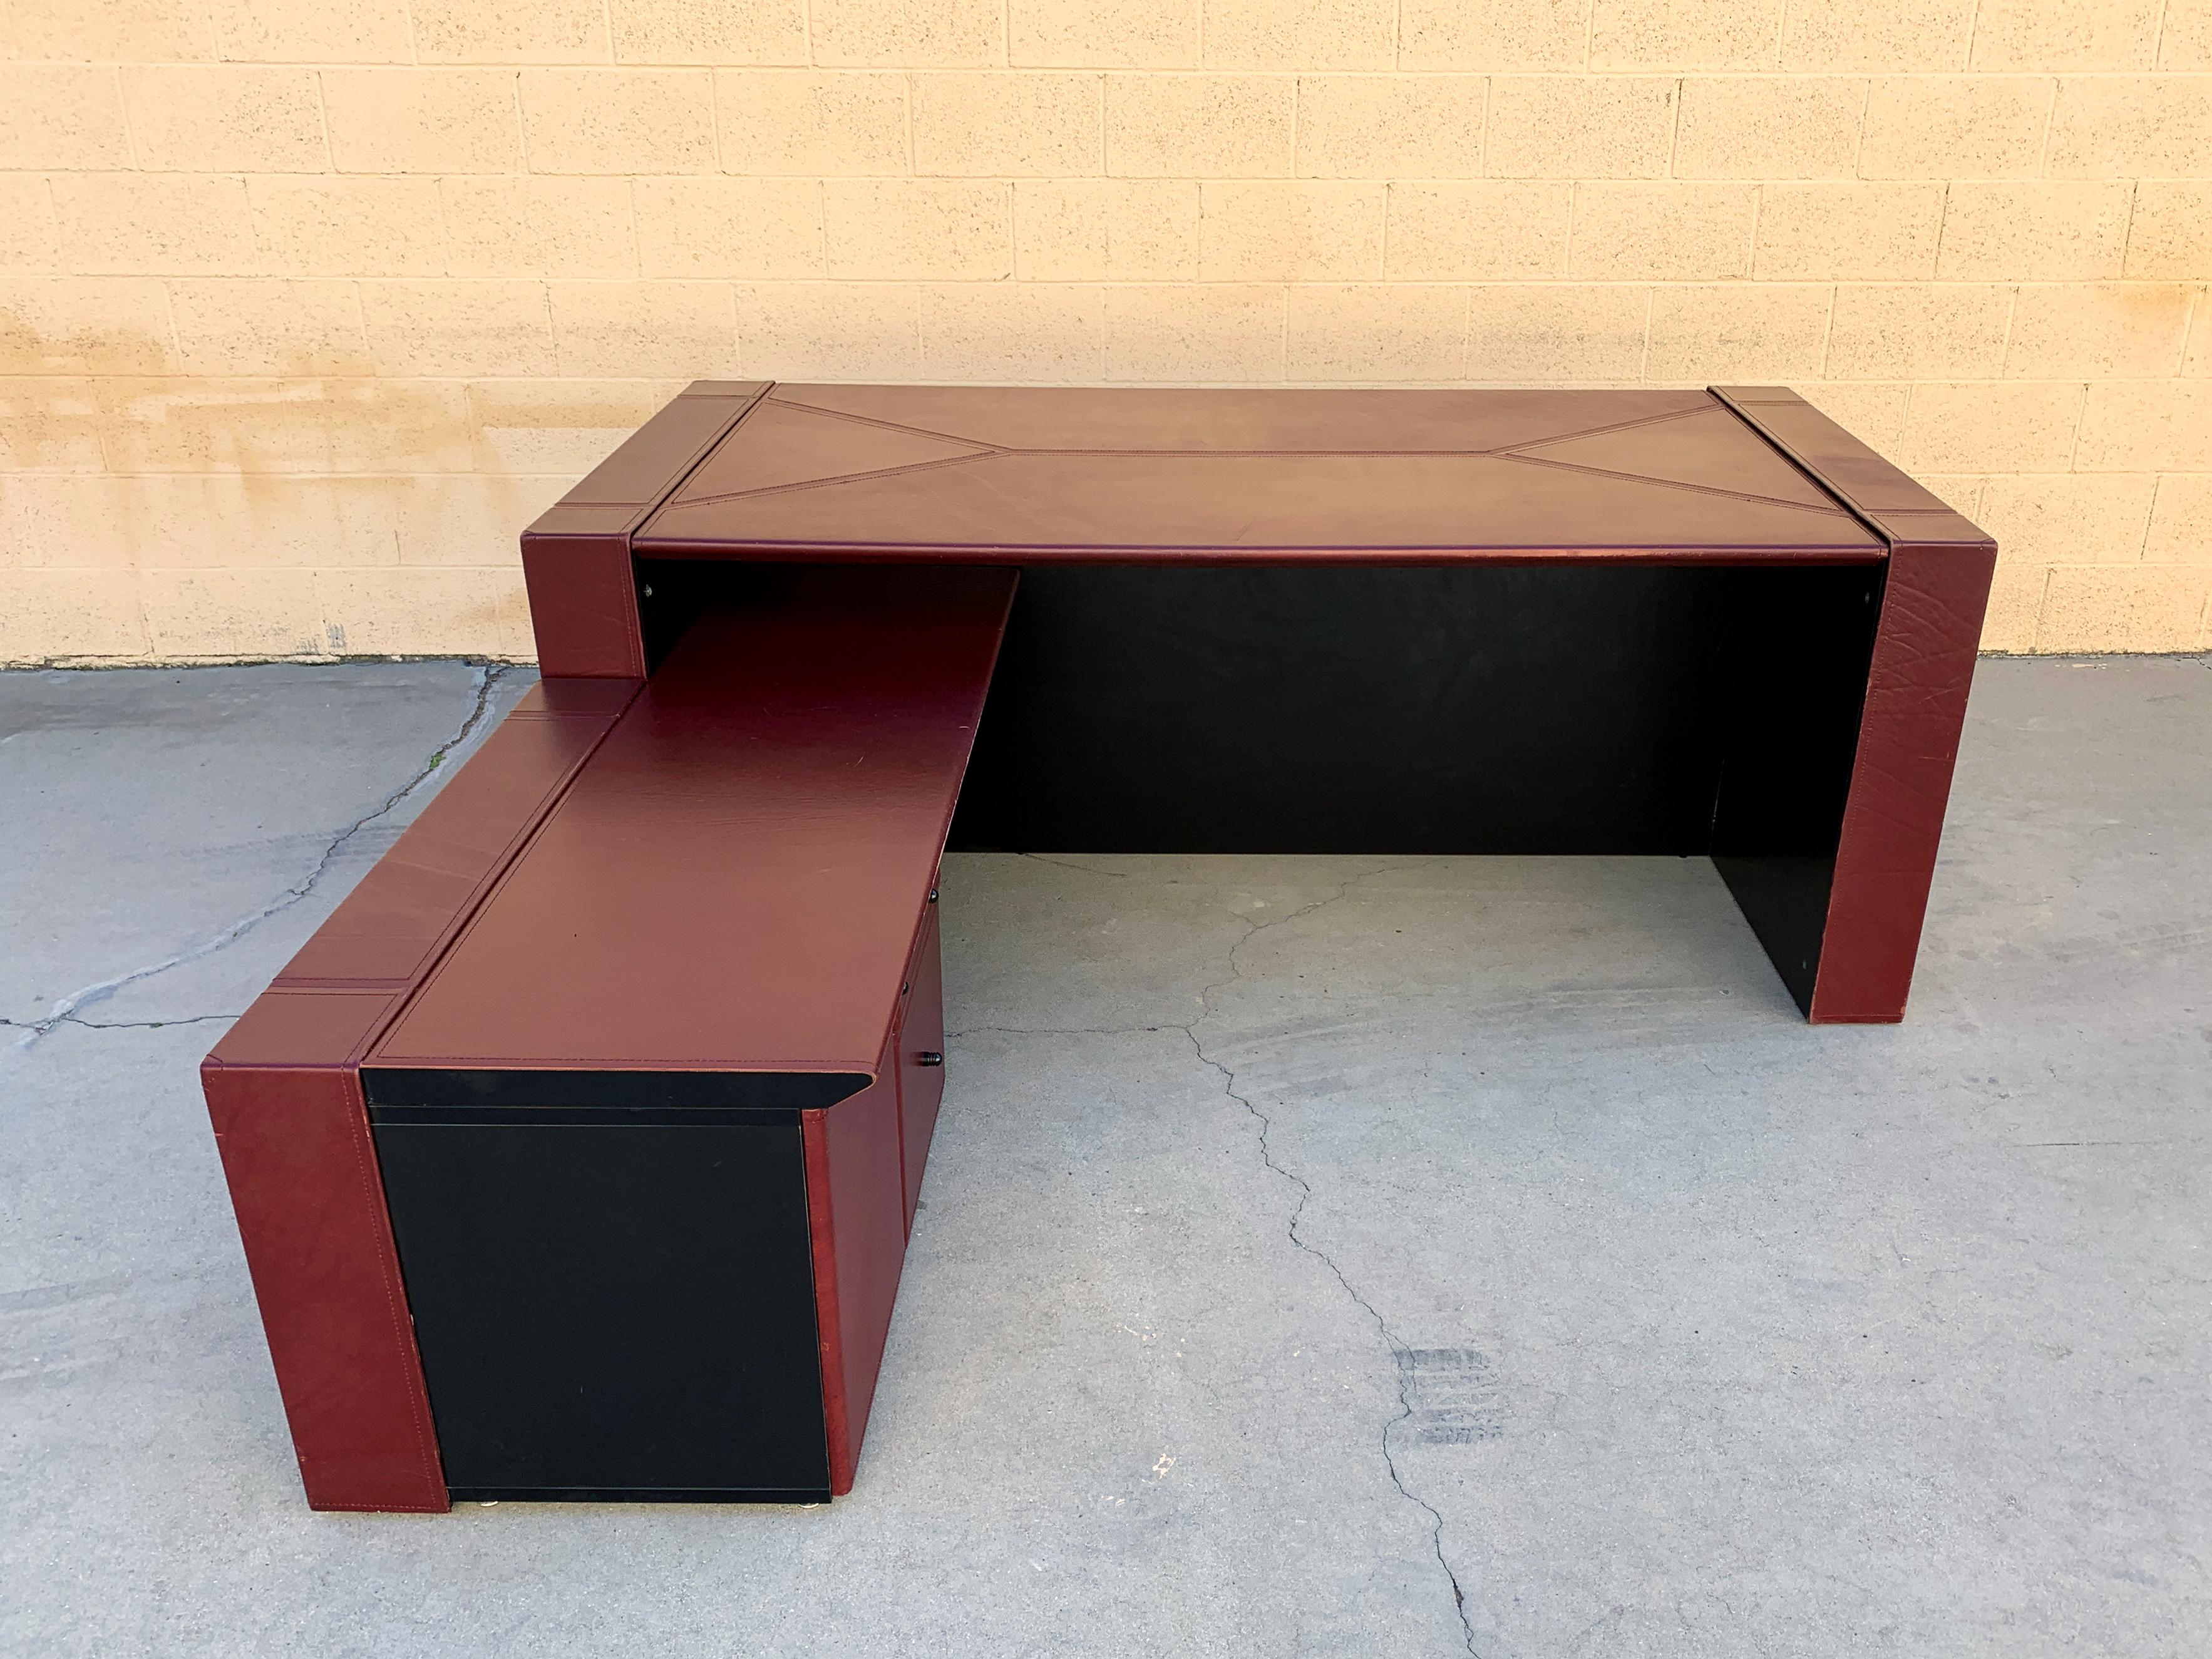 Stylish and quality made executive office desk produced in the mid-1970s by i4Mariani Italy and retailed in the U.S. through Pace collection. Believed to have been designed by architect Guido Faleschini.

This two-piece modular desk with return